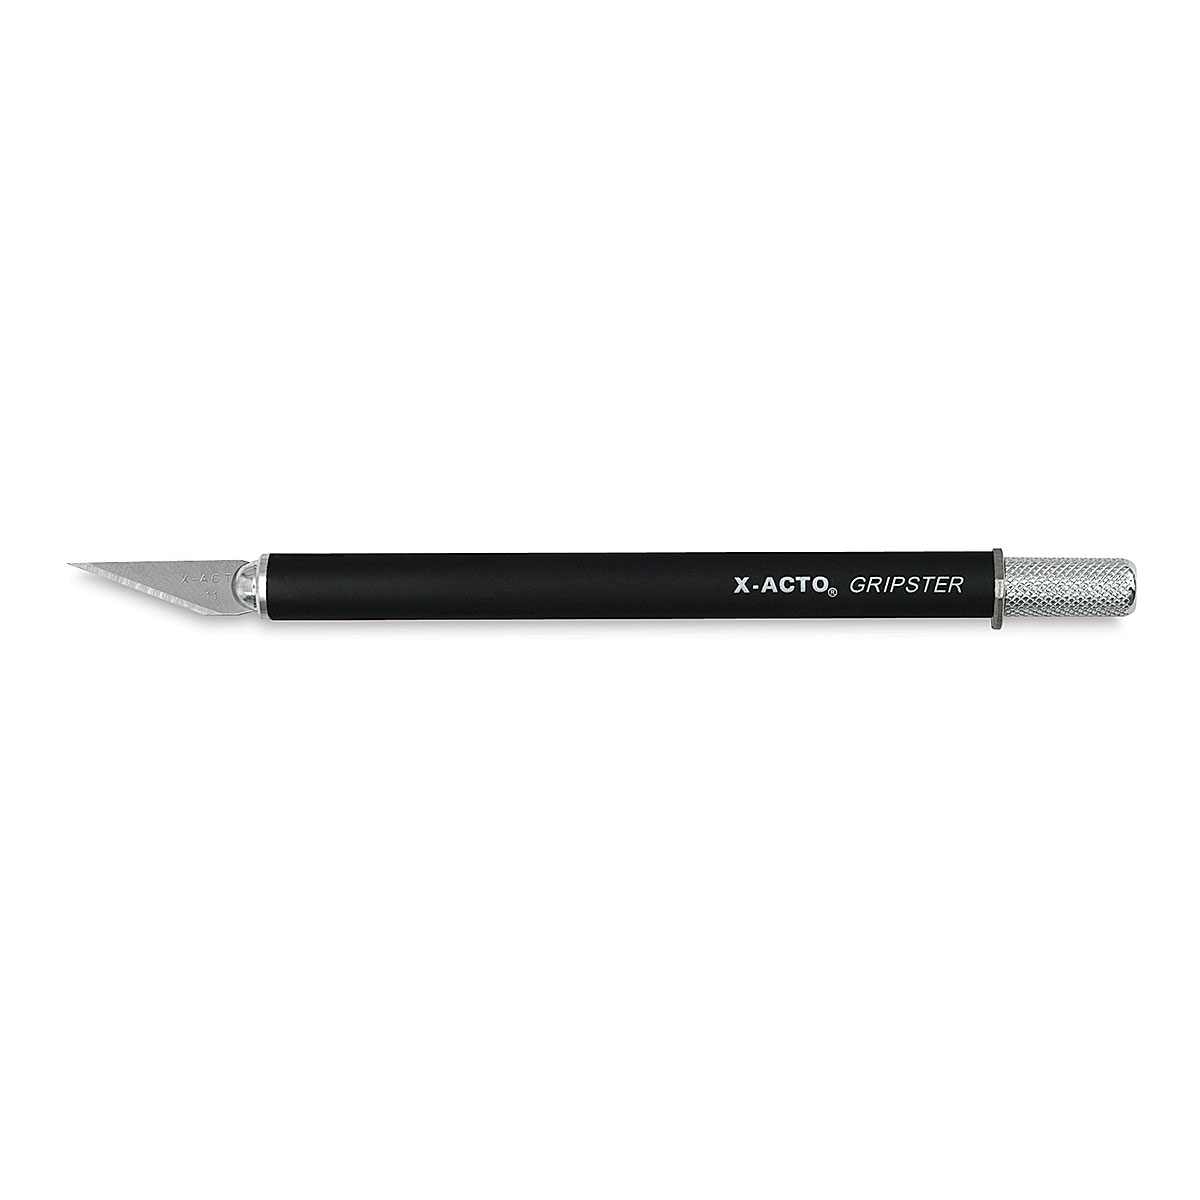 x-acto-gripster-knife-black-with-cap-blick-art-materials